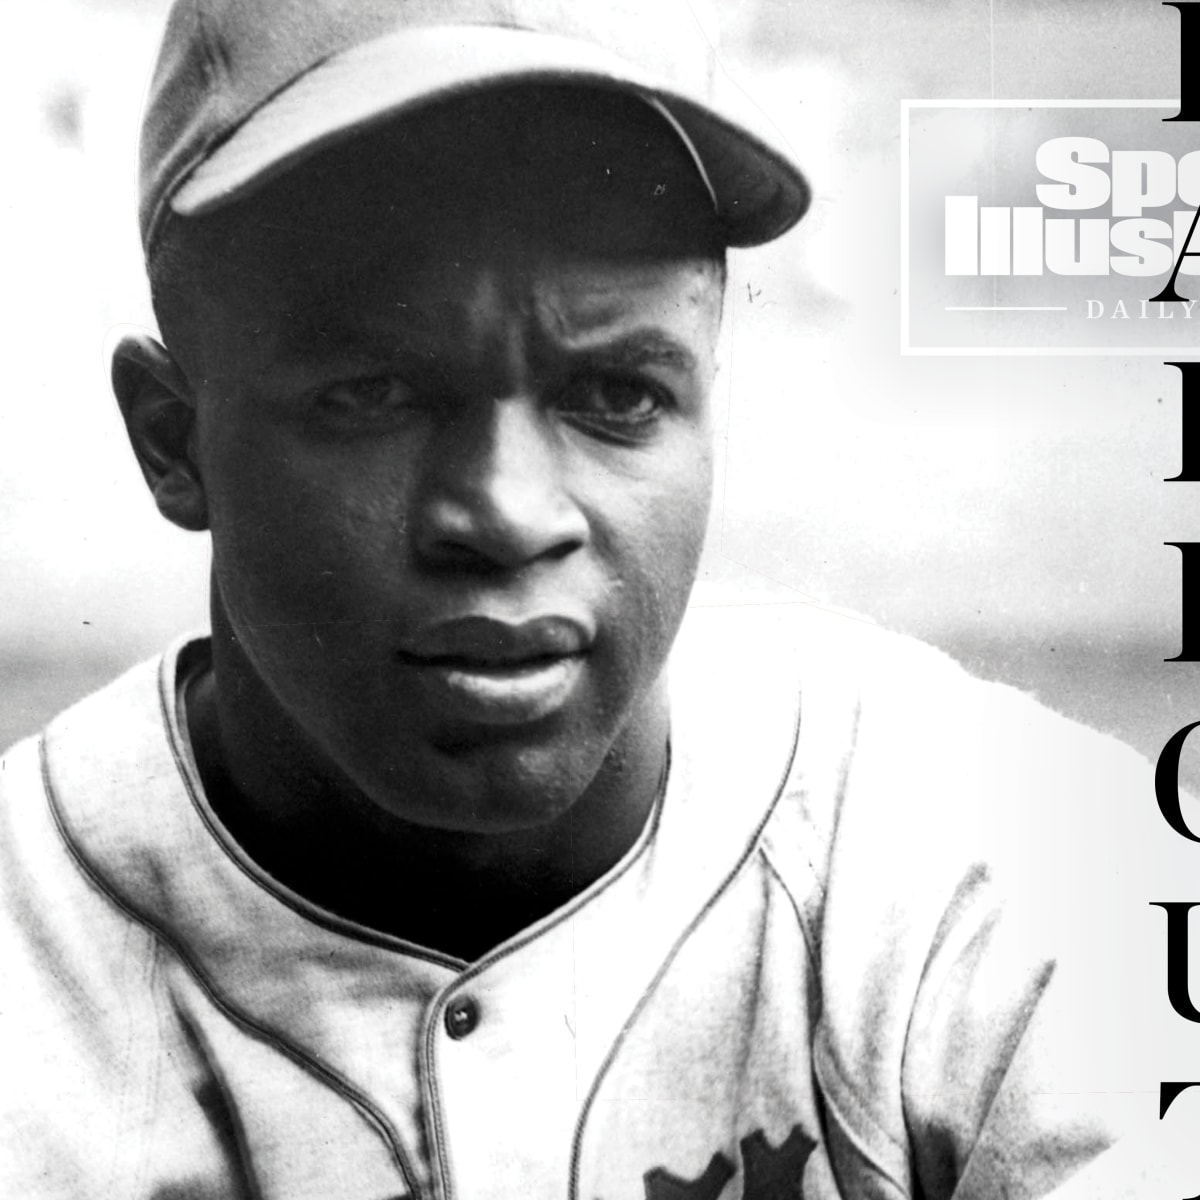 Jackie Robinson's influence 75 years after he broke the color barrier